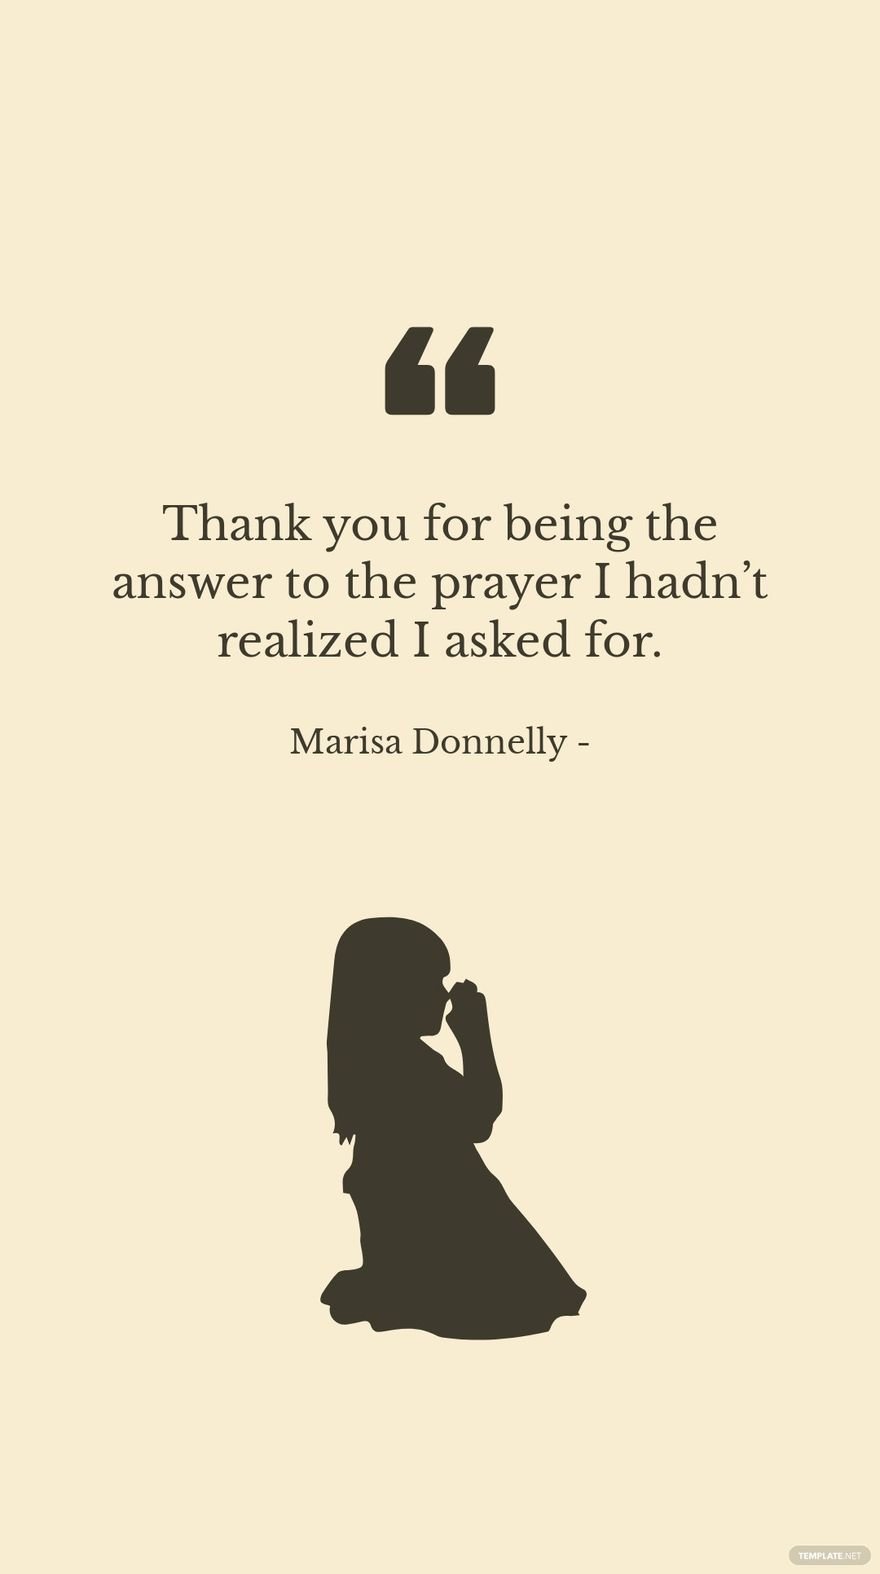 Free Marisa Donnelly - Thank you for being the answer to the prayer I hadn’t realized I asked for. in JPG